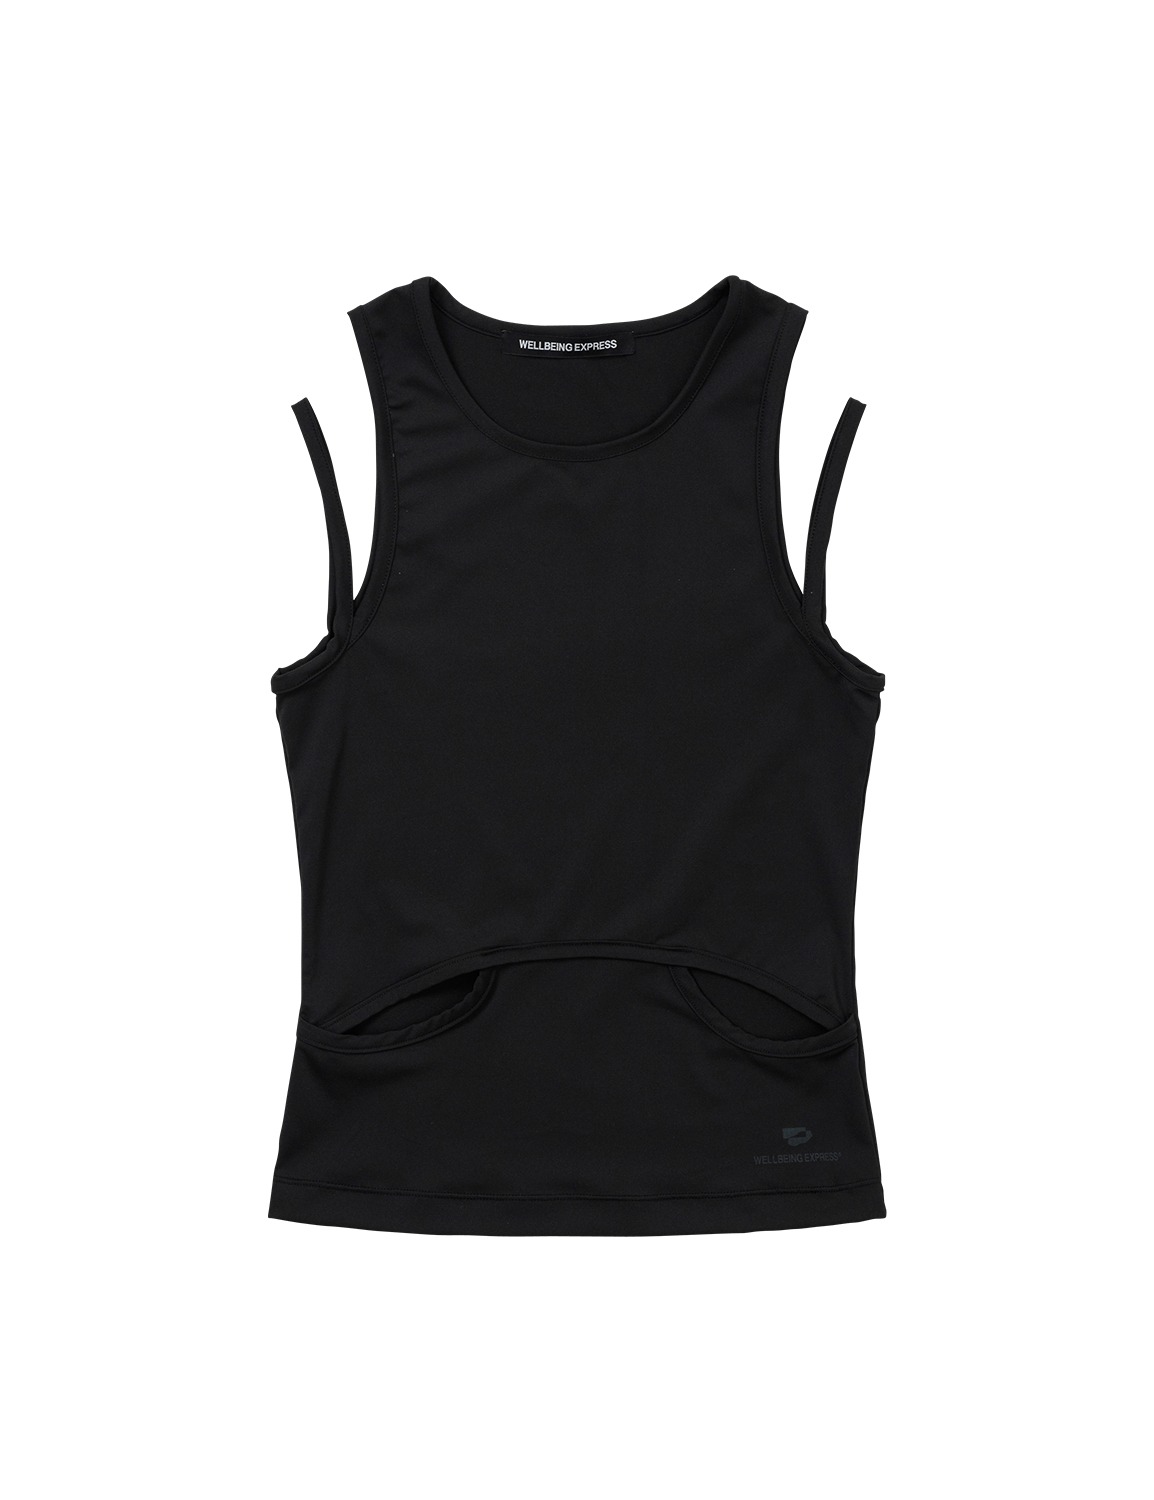 Cut-Out Sleeveless Black